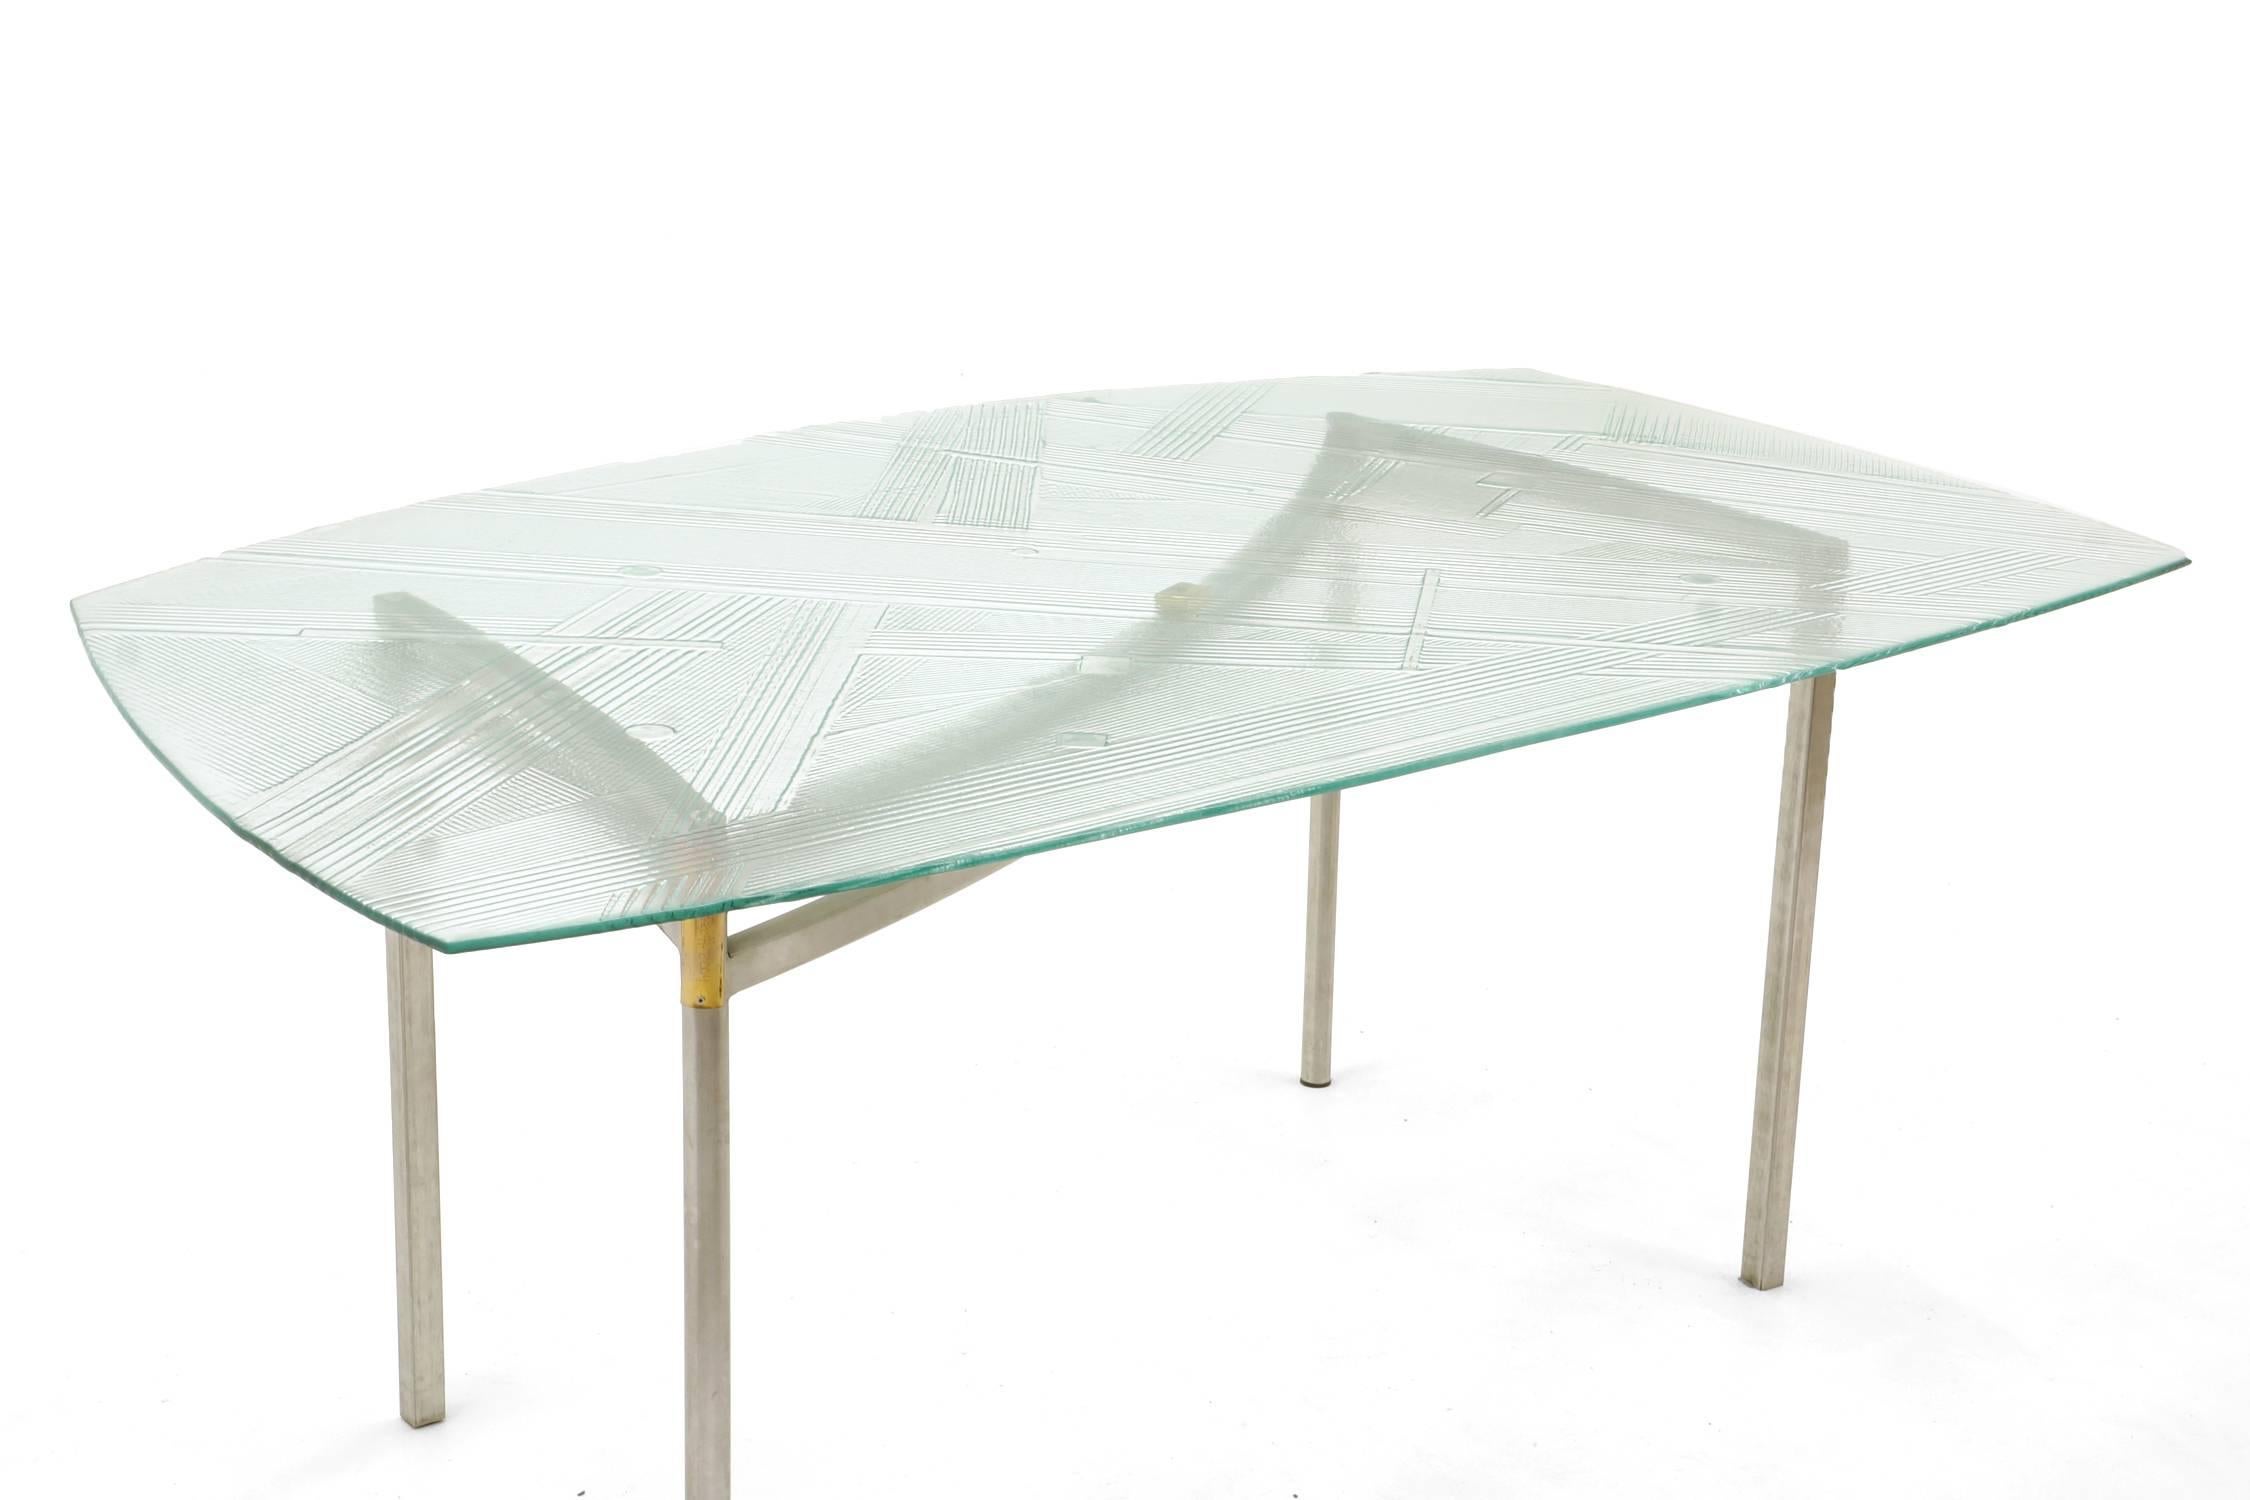 Modern Custom Art Glass Dining Table with Aluminum Base, Unique, One of a Kind